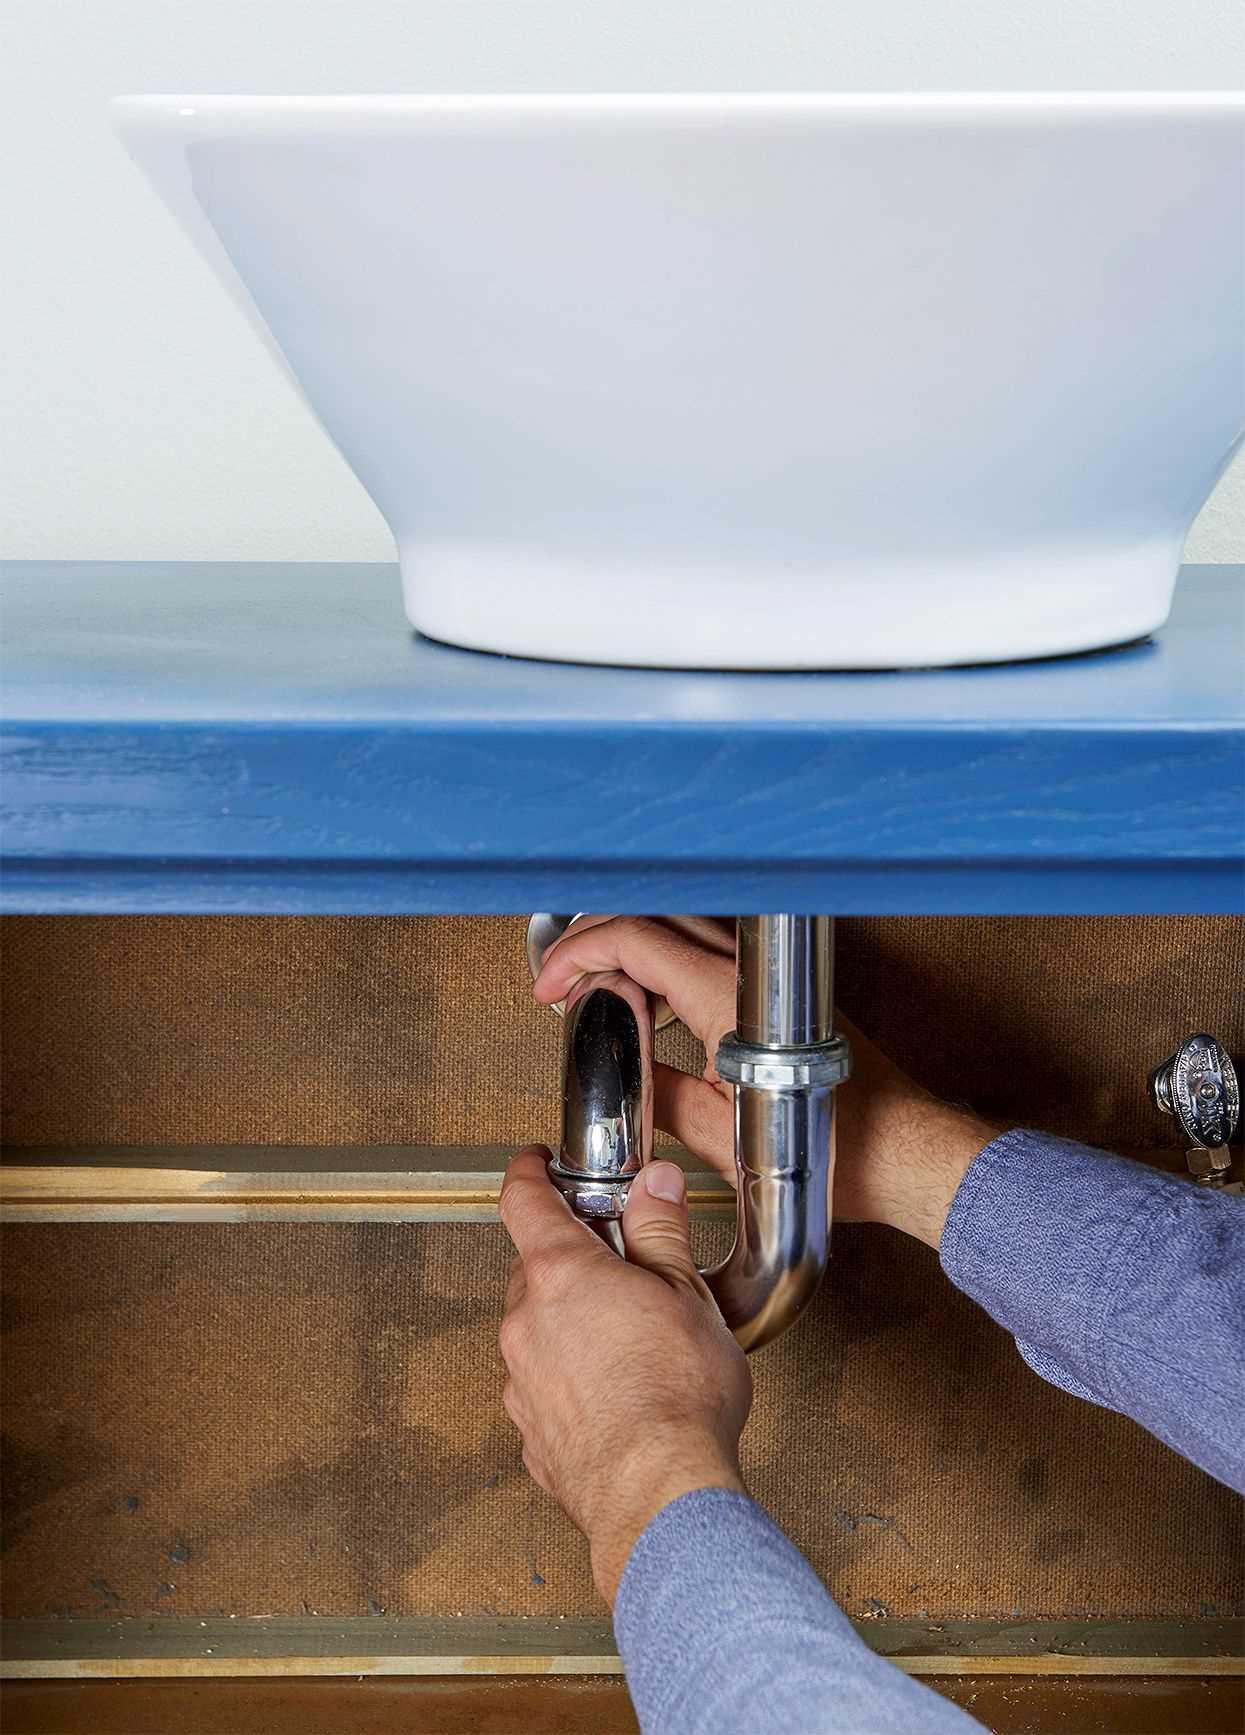 Essential Sink Drain Parts A Guide to Understanding and Maintaining Your Drain System